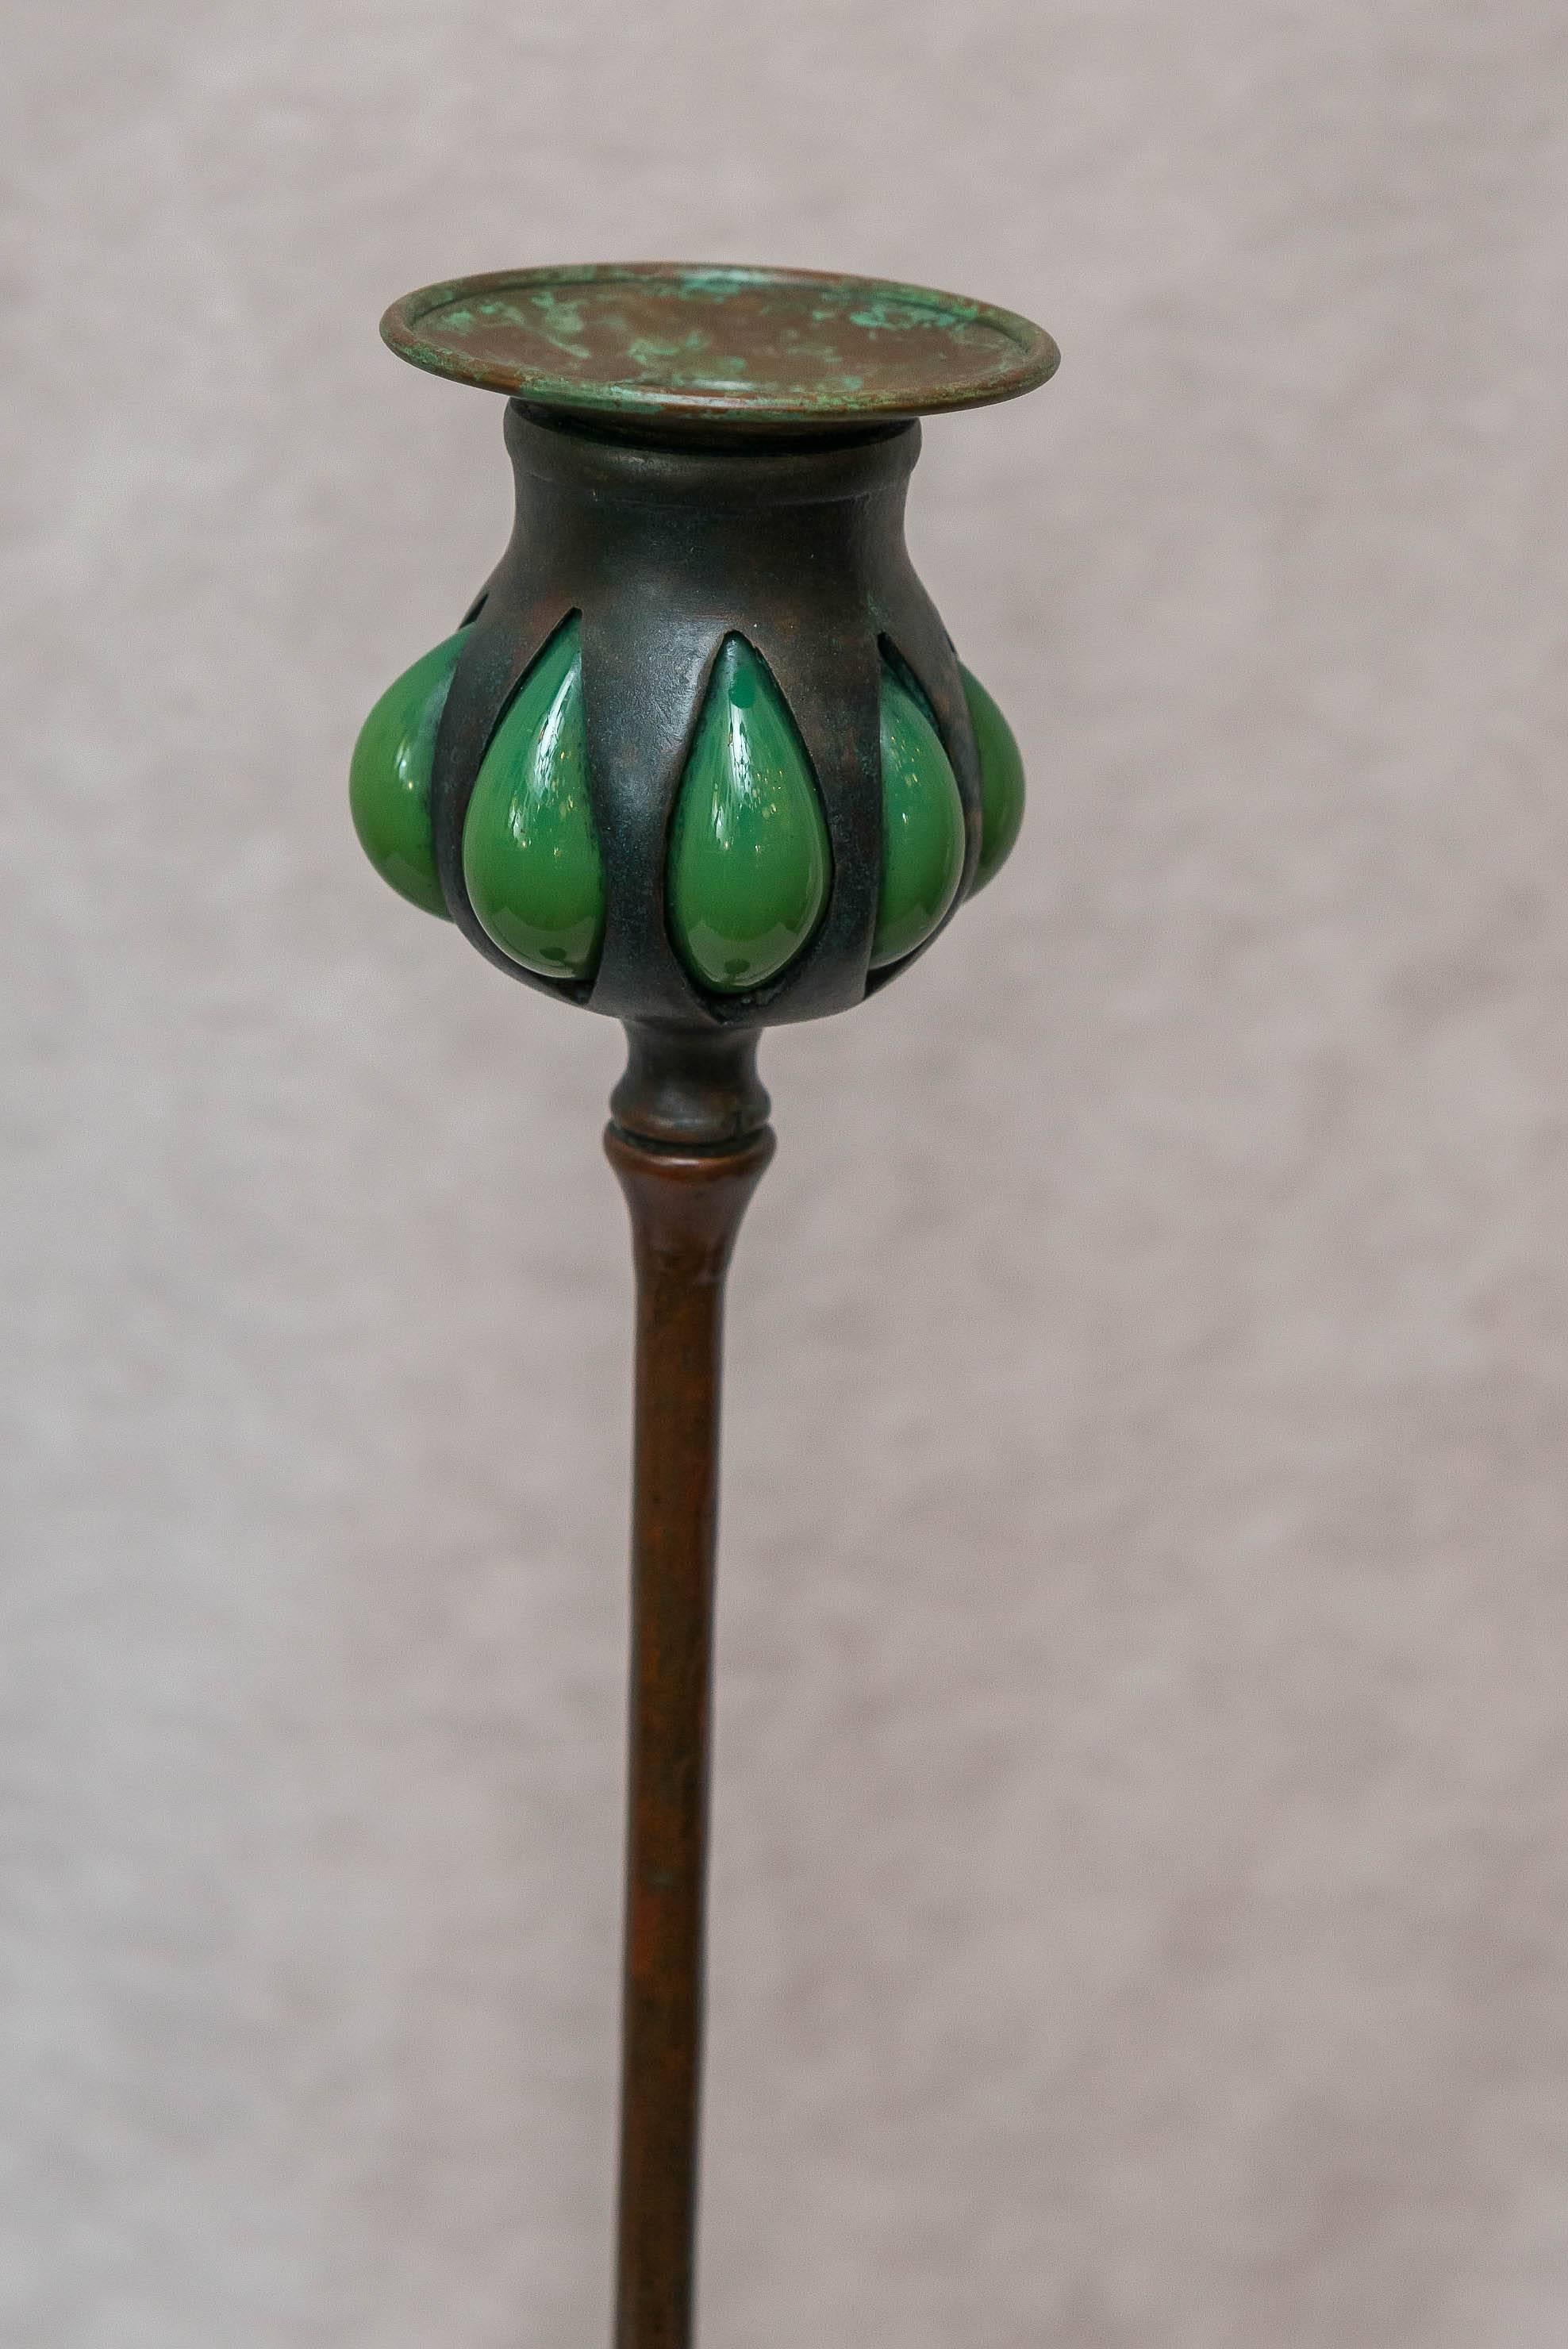 This tall and elegant Tiffany Studios candlestick would surely look wonderful in any home. Properly signed, and guaranteed to be a real period candlestick by this famous artist.

